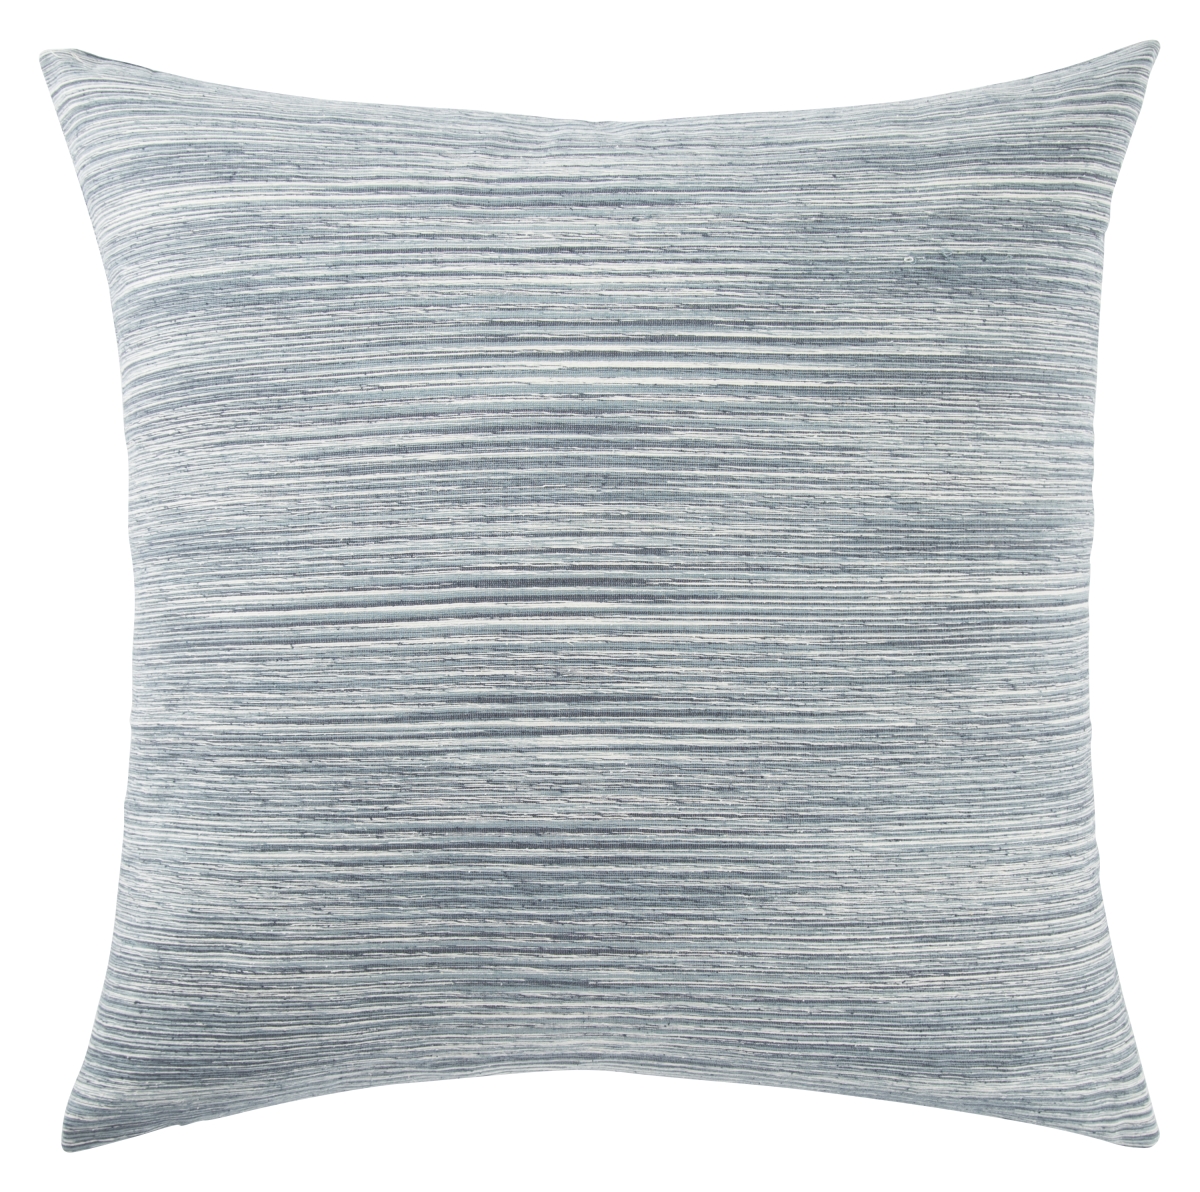 Plw103129 22 X 22 In. Mandarina Galexy Blue & White Solid Down Throw Pillow